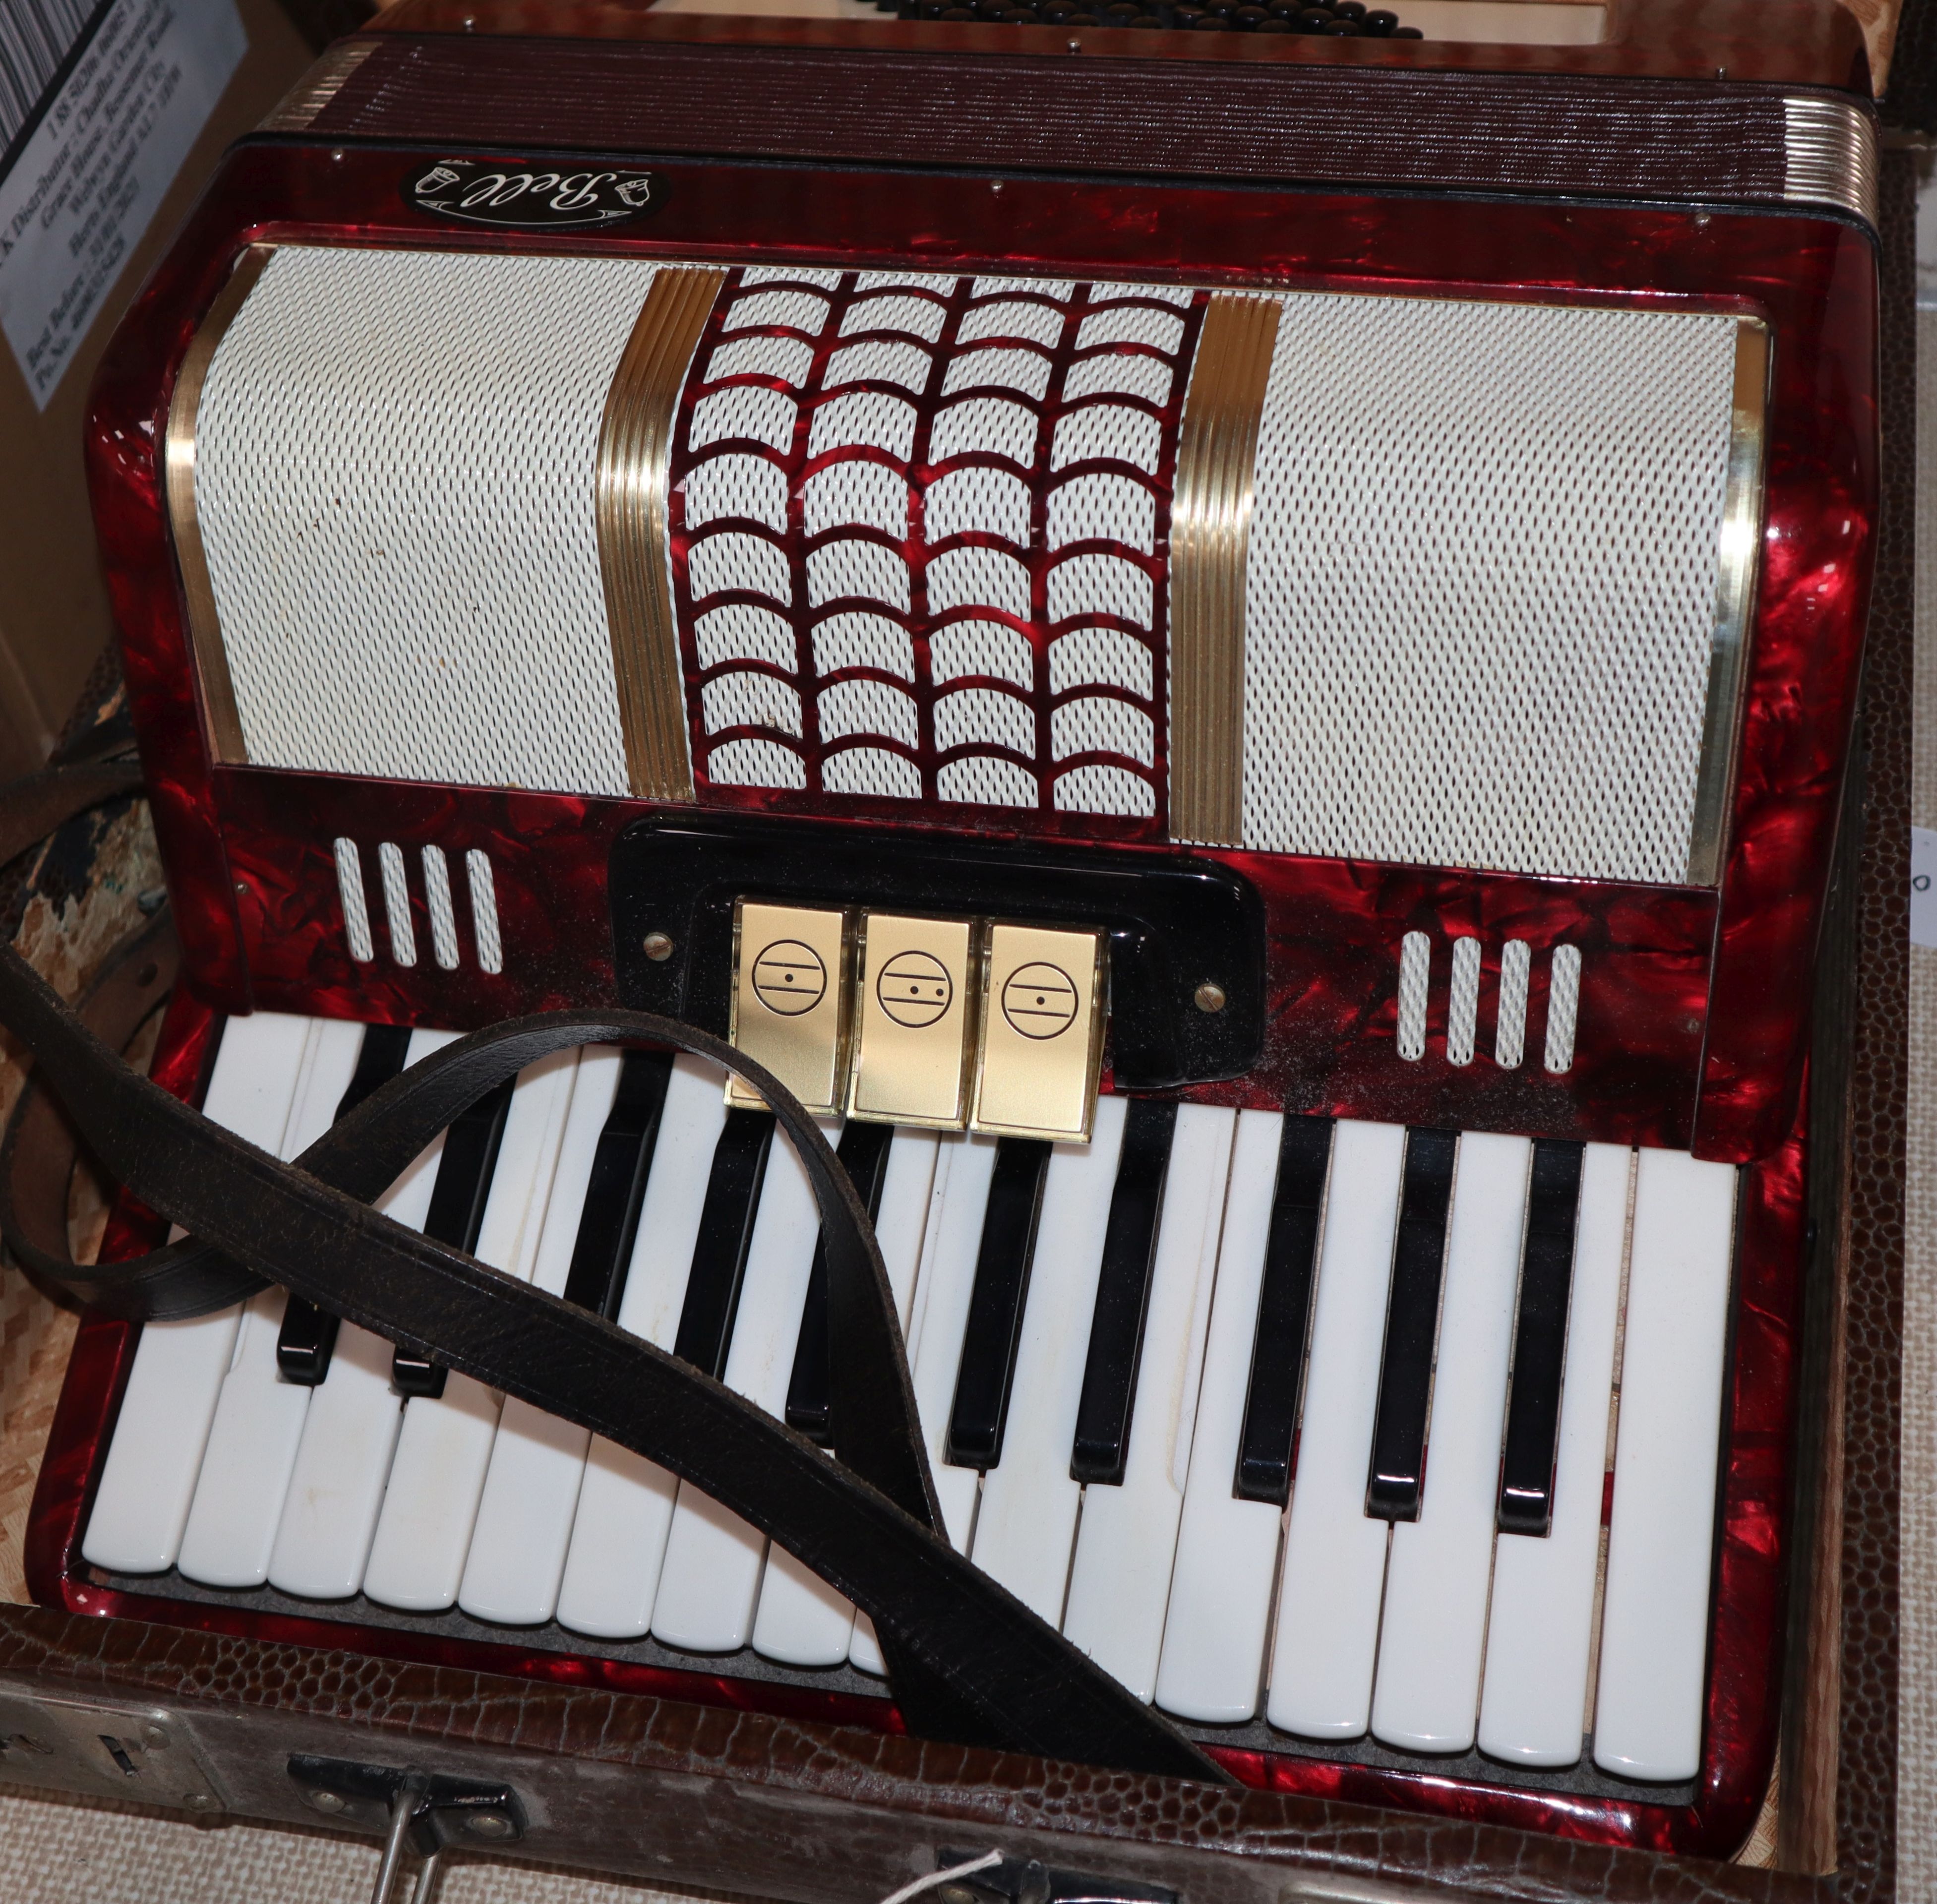 A cased accordian